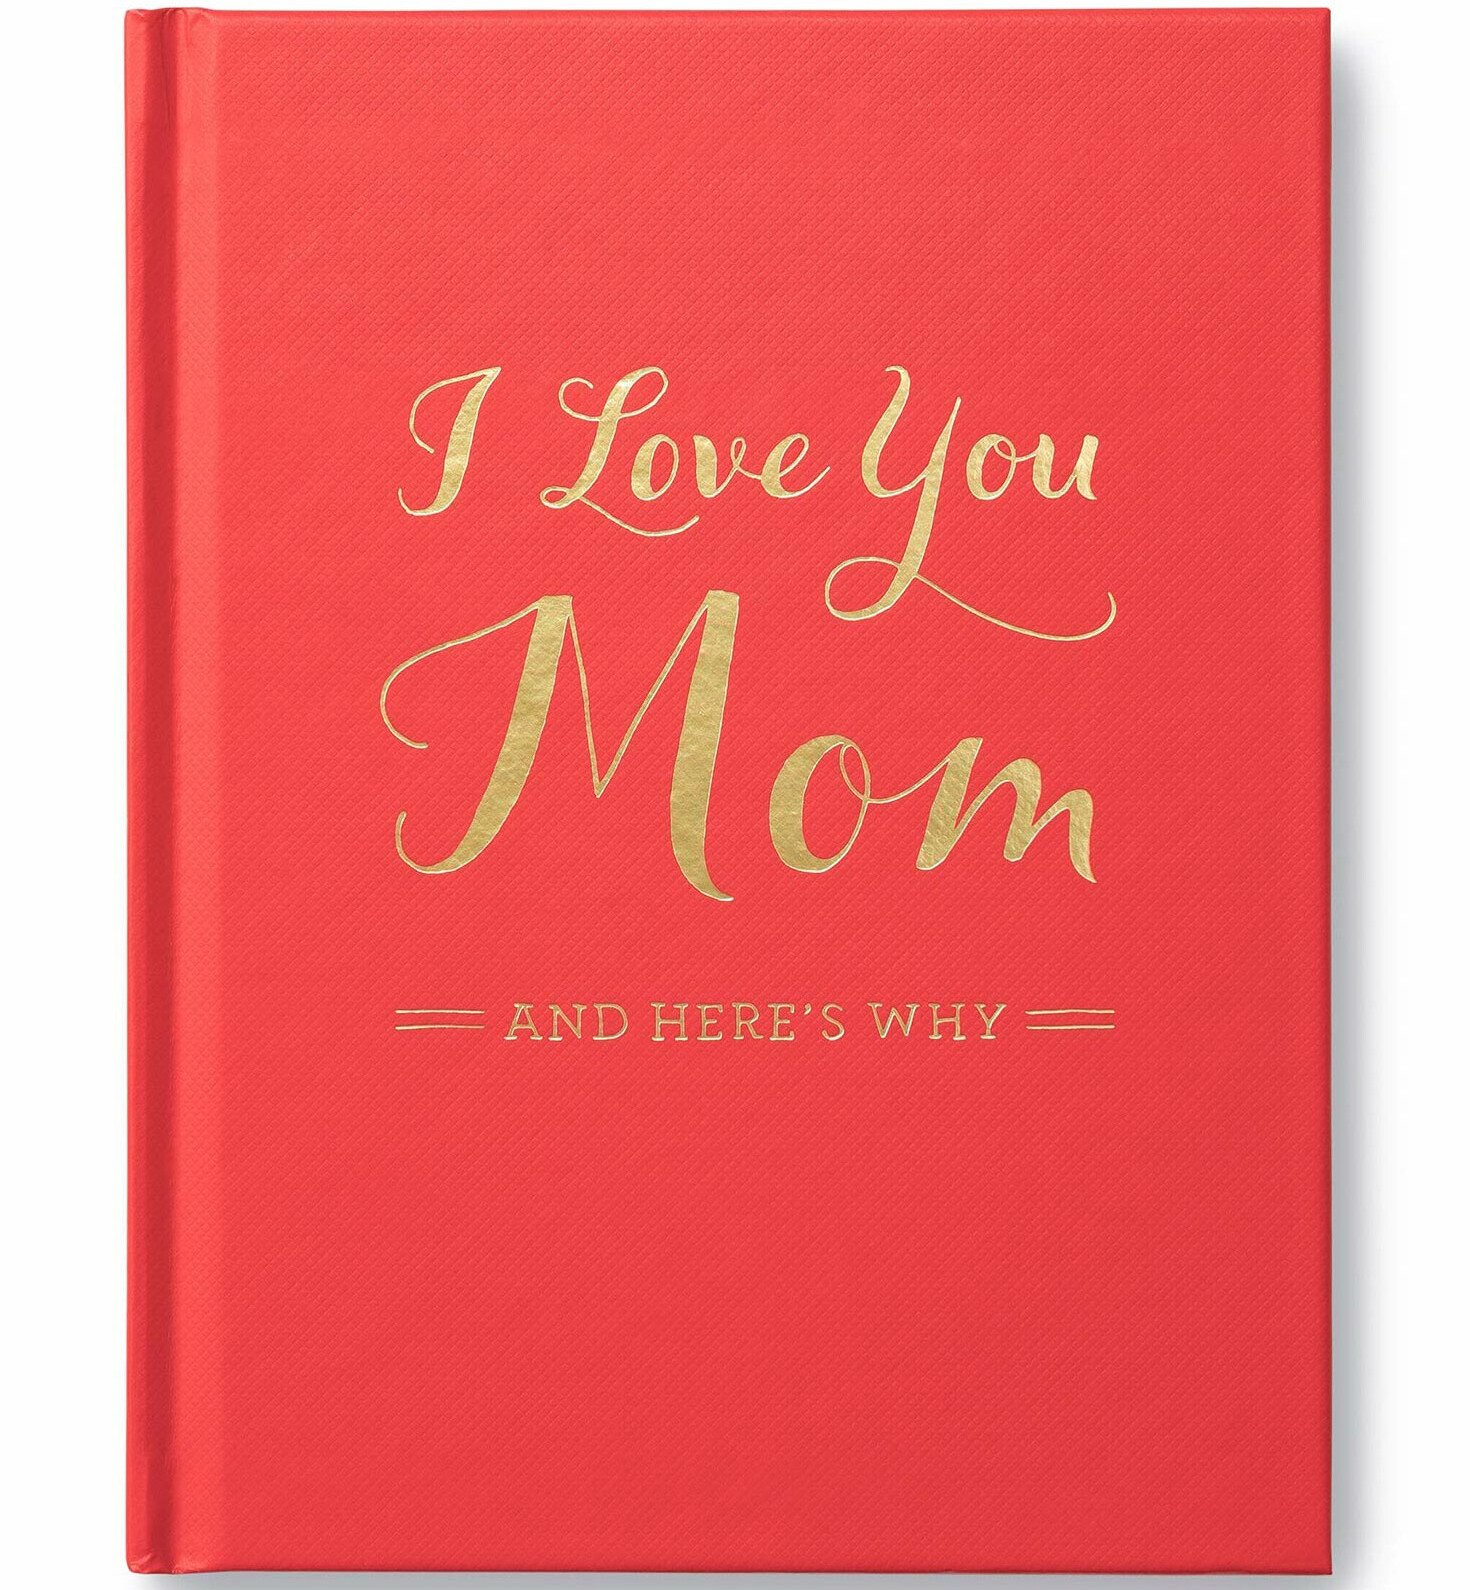 "I Love You Mom and Here's Why" book